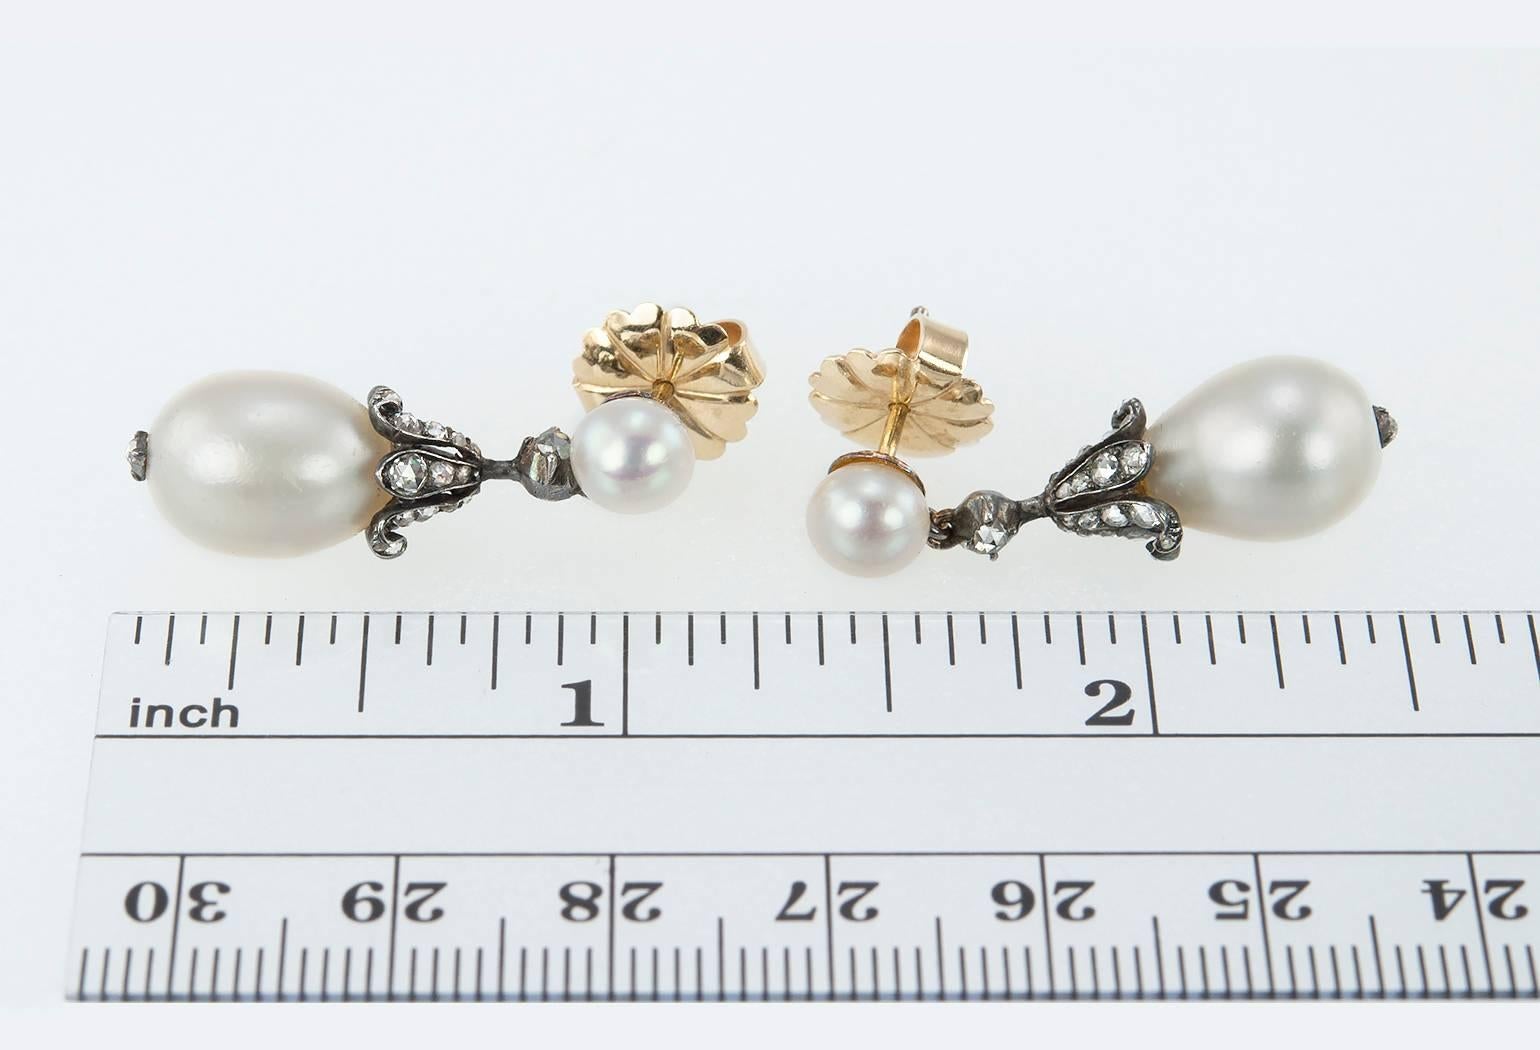 Victorian antique natural pearl and diamond dangle earrings in 18 karat yellow gold and silver.  The earrings feature 2 natural, button white pearls at the top that have a pinkish overtone with rose cut diamonds below that emanate a subtle sparkle.